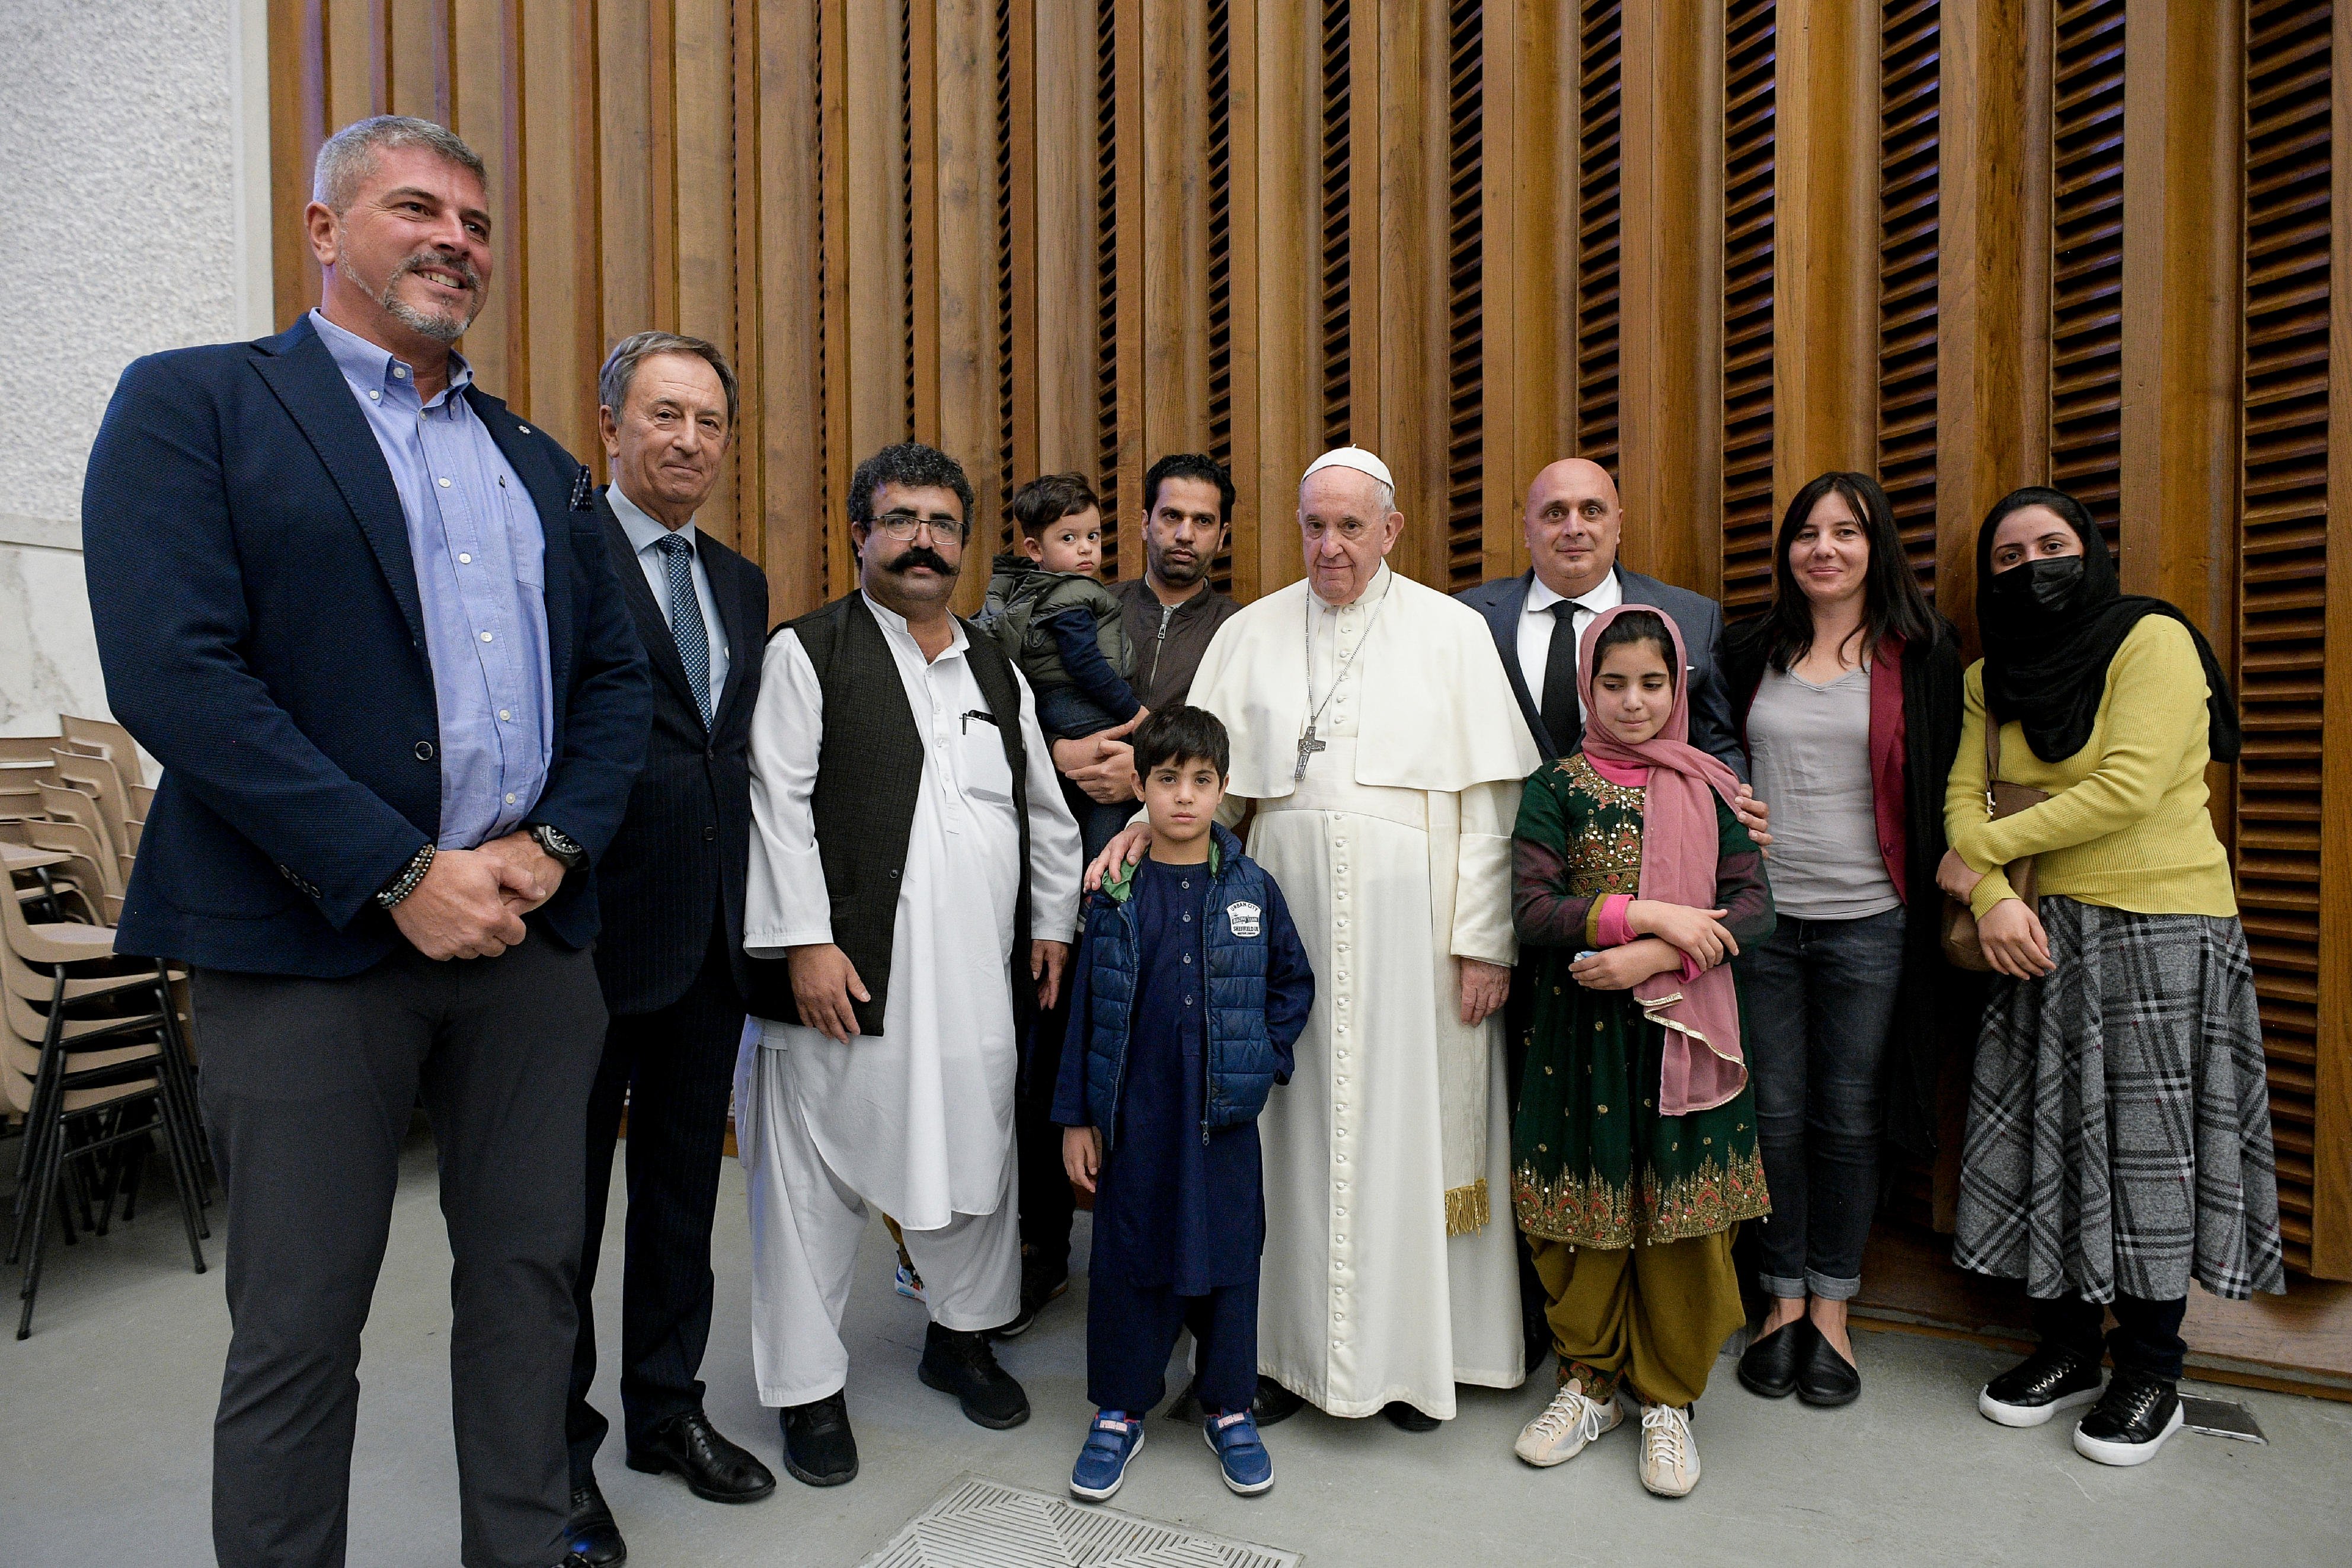 Pope Francis meets family members who fled from Afghanistan, during his general audience in the Paul VI hall at the Vatican Oct. 13, 2021. (CNS photo/Vatican Media)